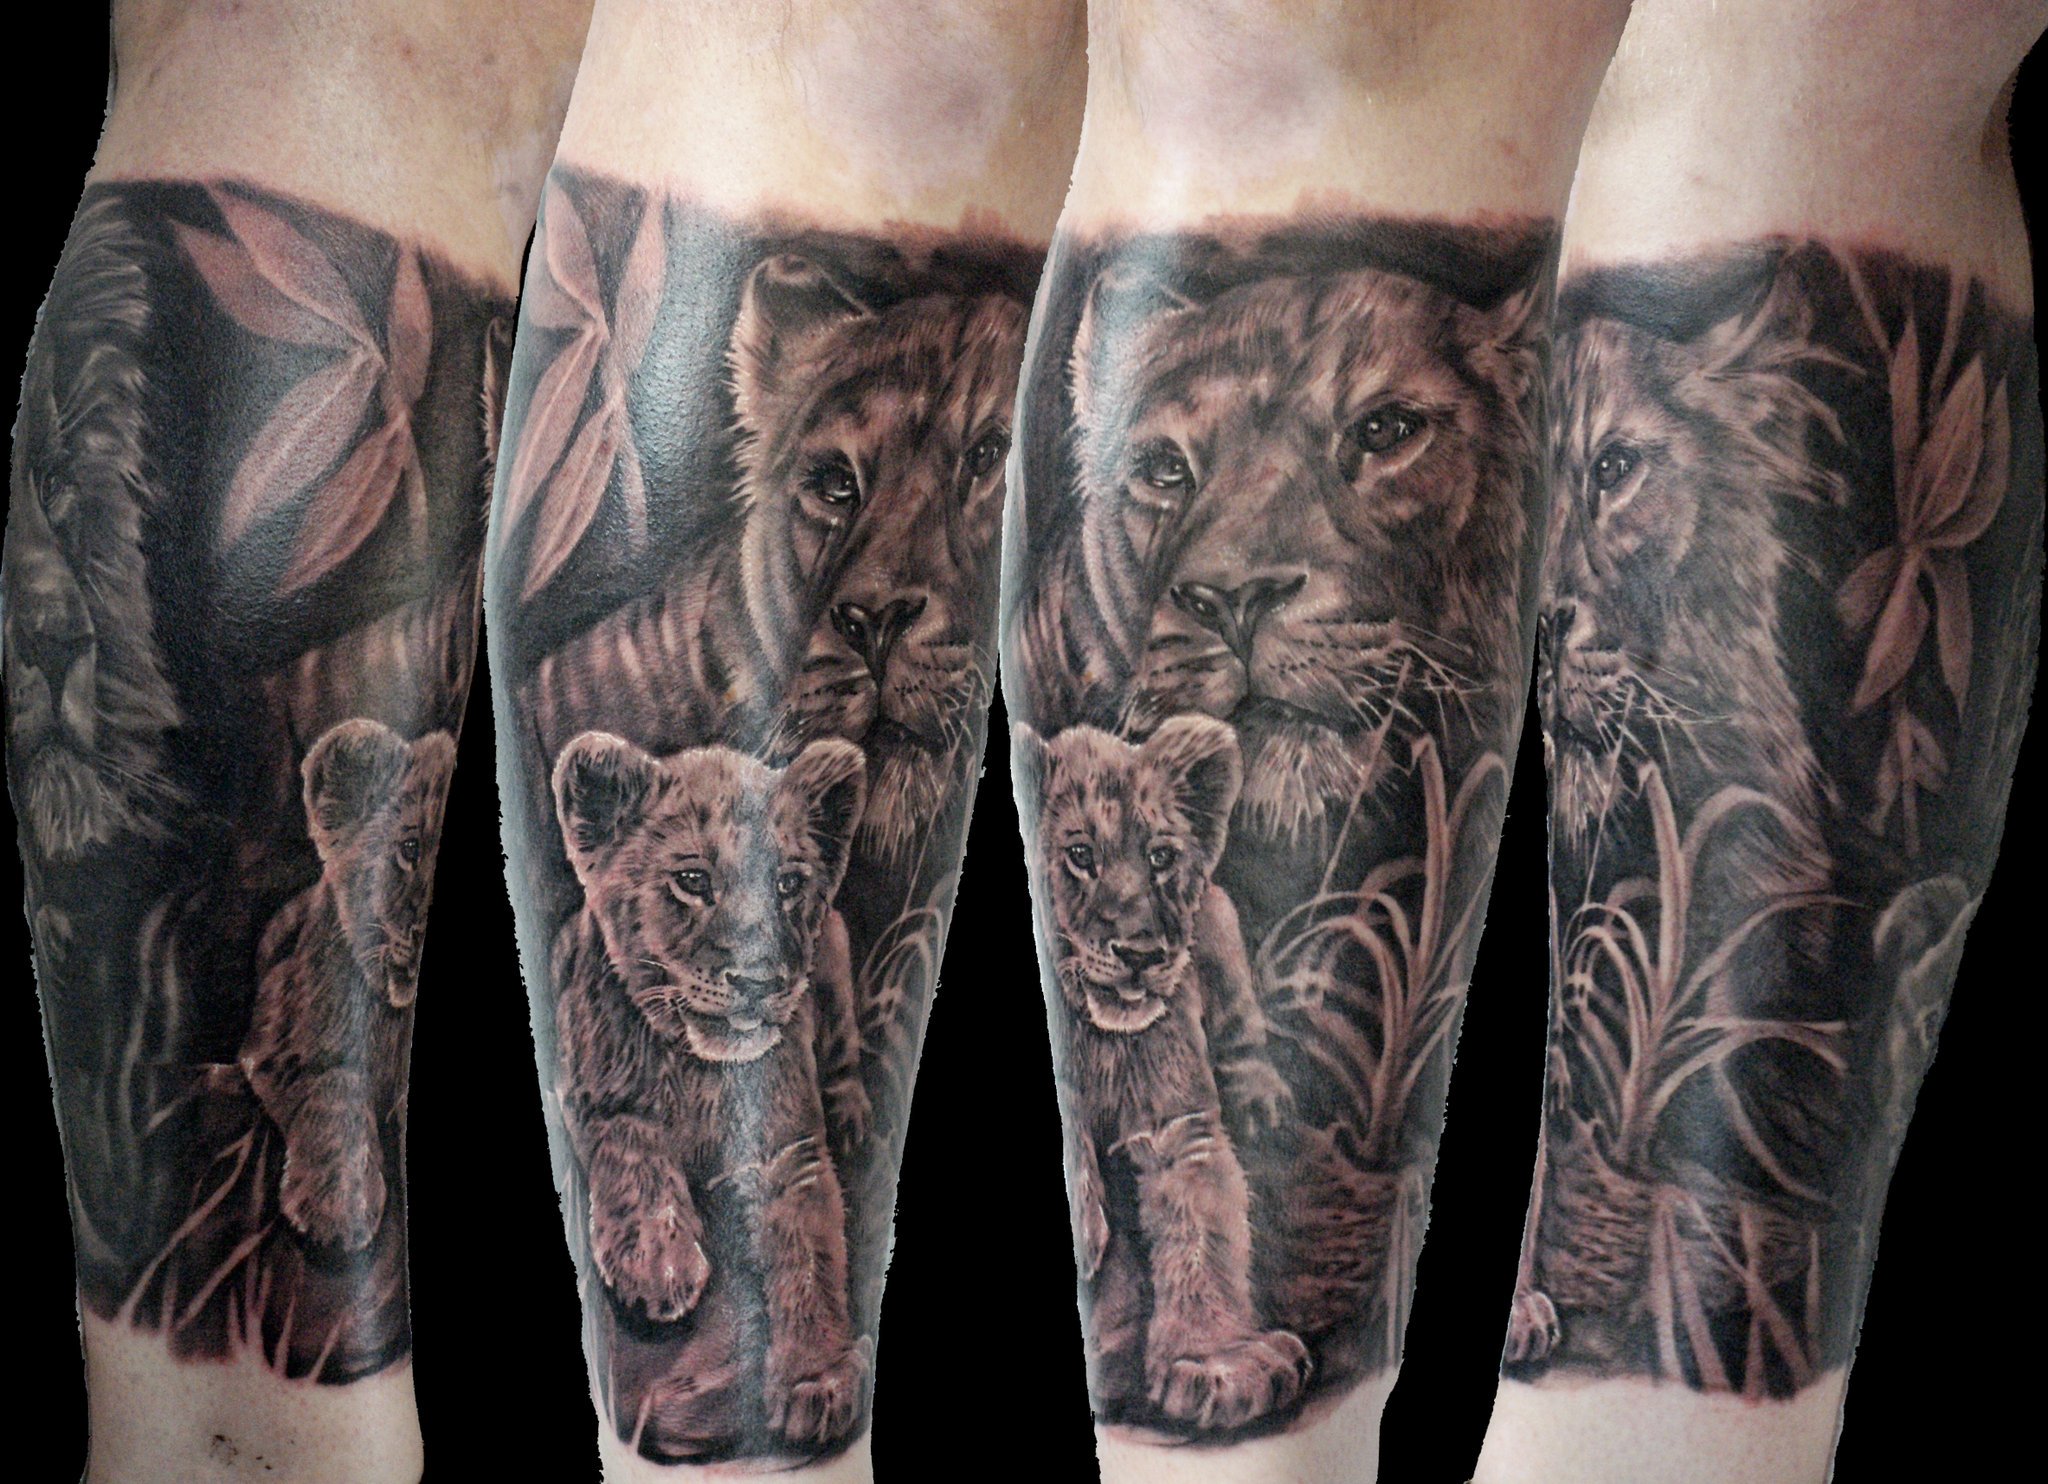 230 Lioness Tattoo Ideas and Designs 2023  TattoosBoyGirl in 2023  Lioness  tattoo Animal tattoos Mom tattoo designs